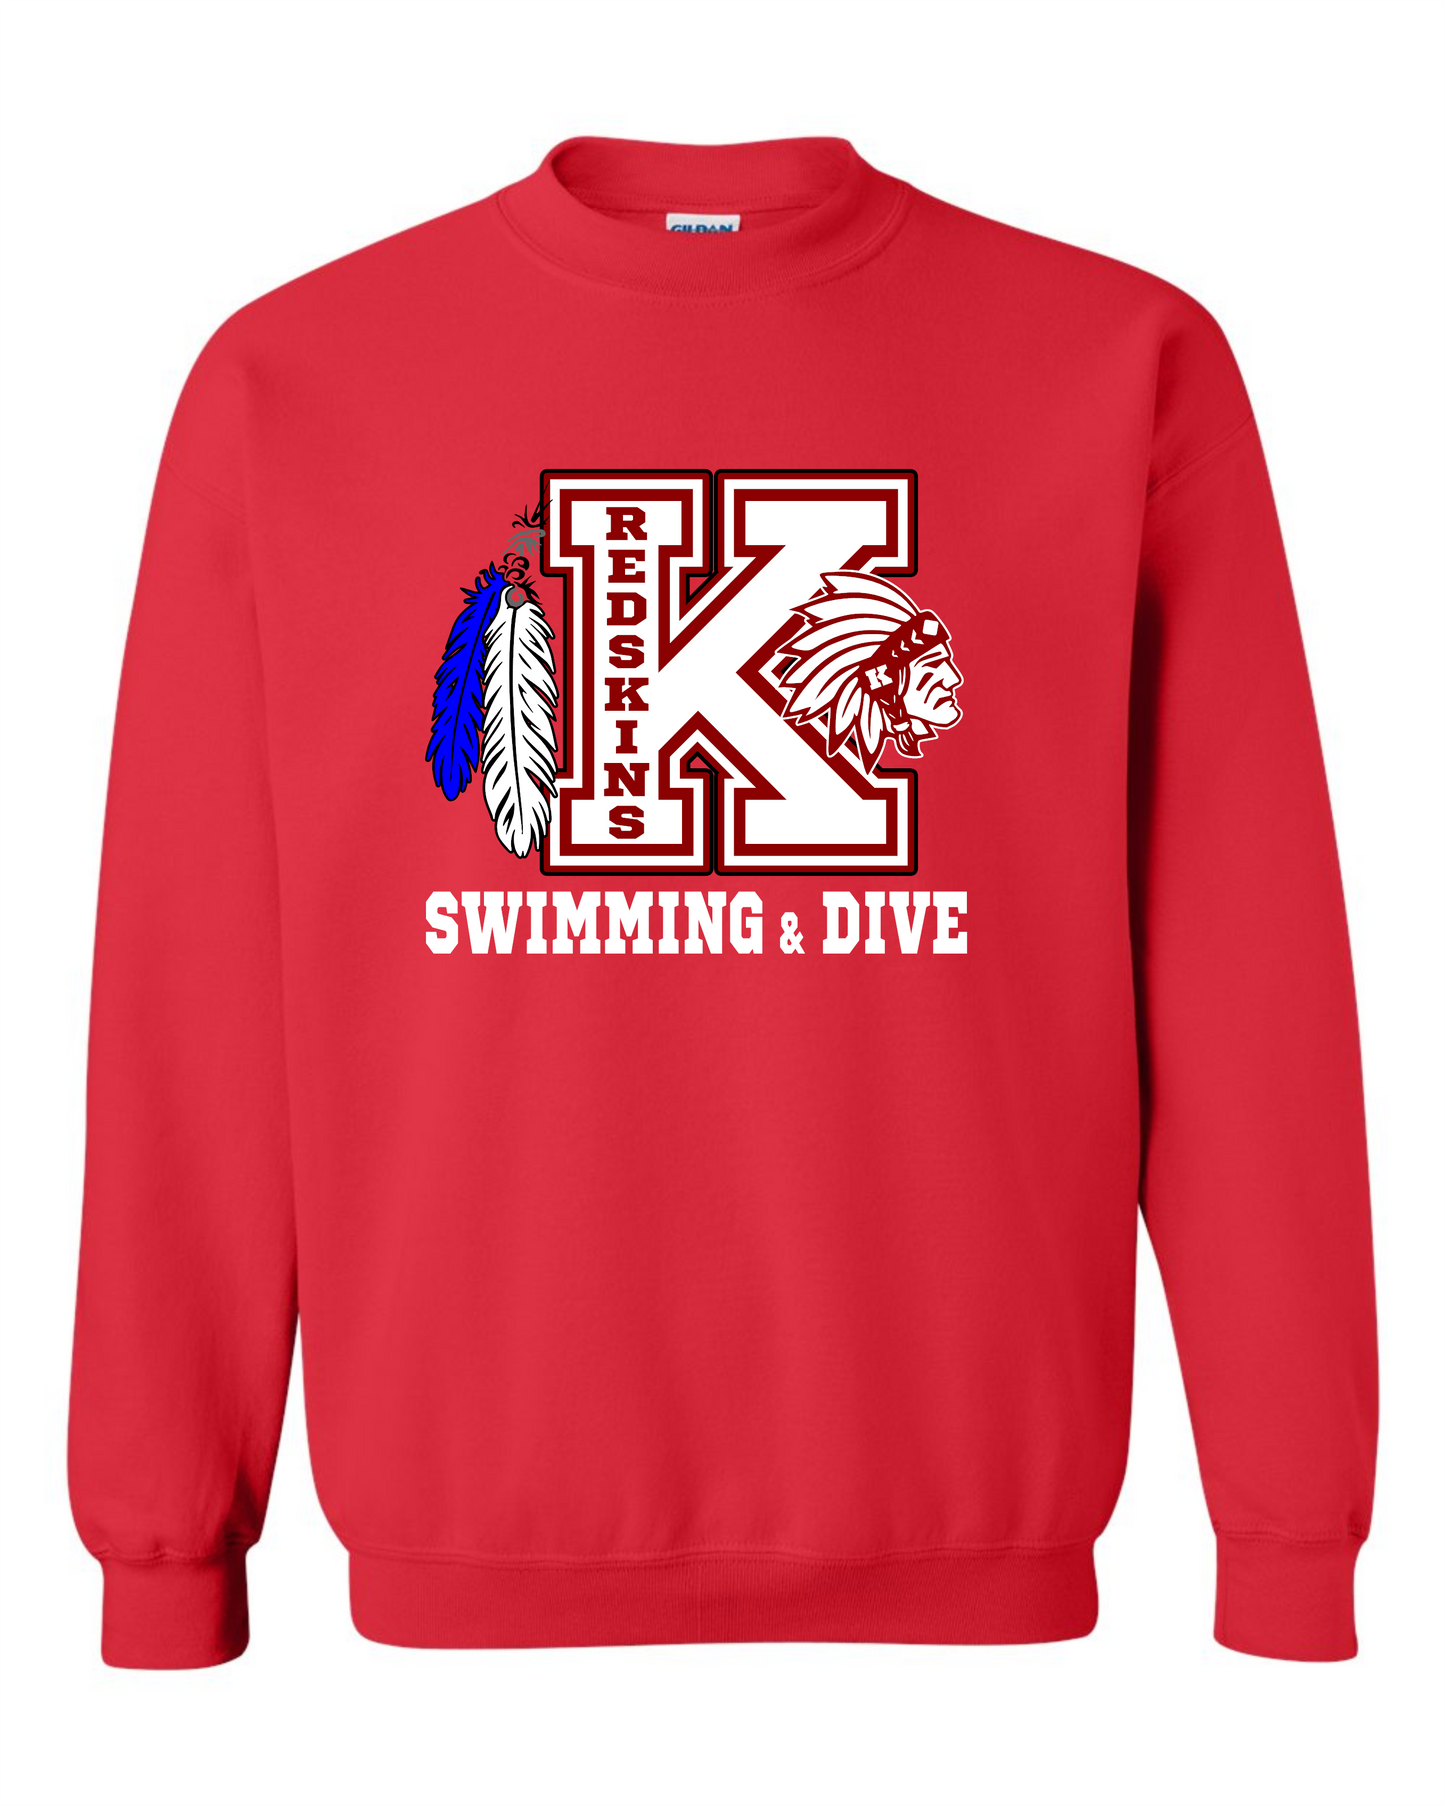 Knox Redskins Swim & Dive Crewneck Sweatshirt - Red - Adult and Youth Sizes